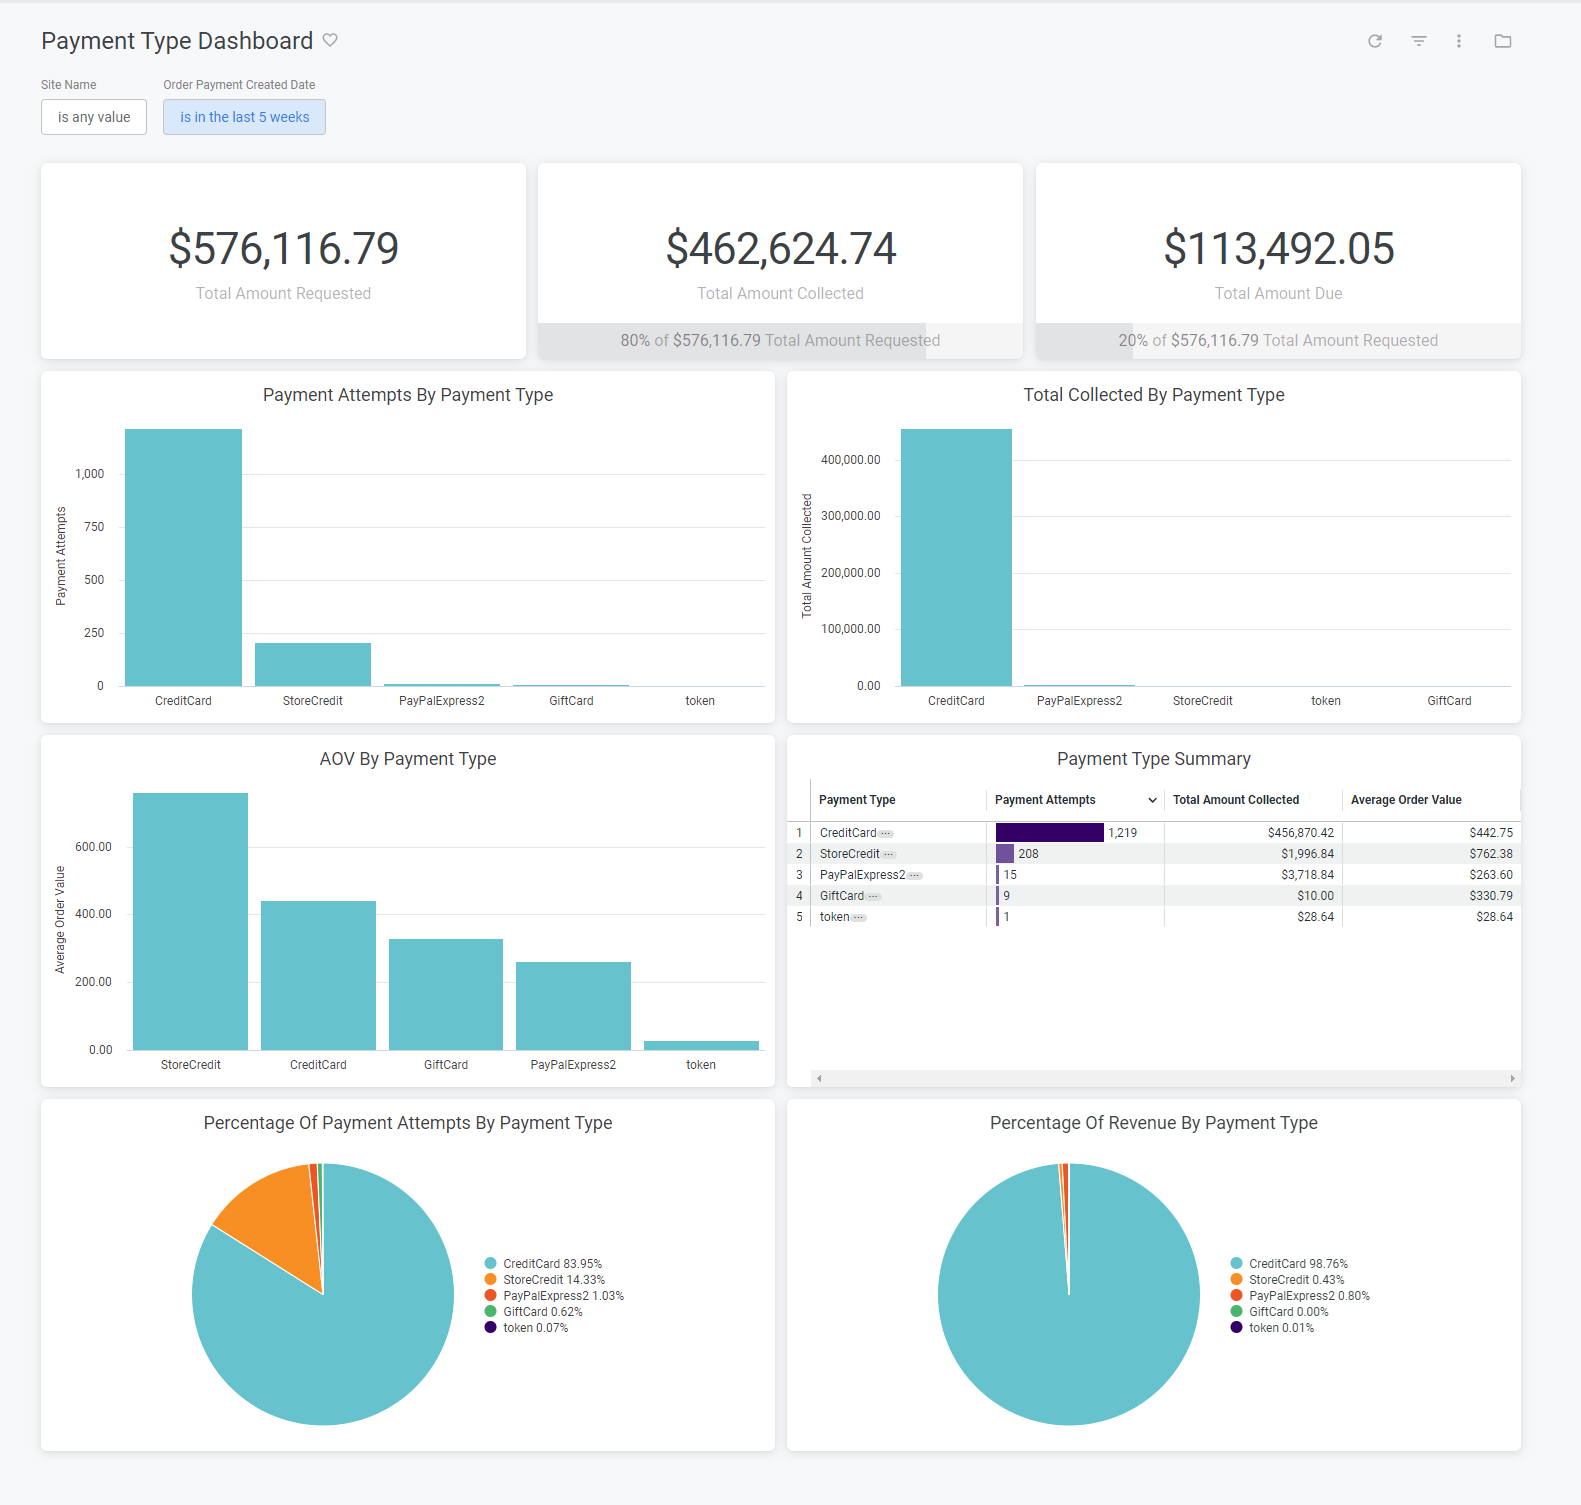 The Payment Details dashboard with graphs and pie charts